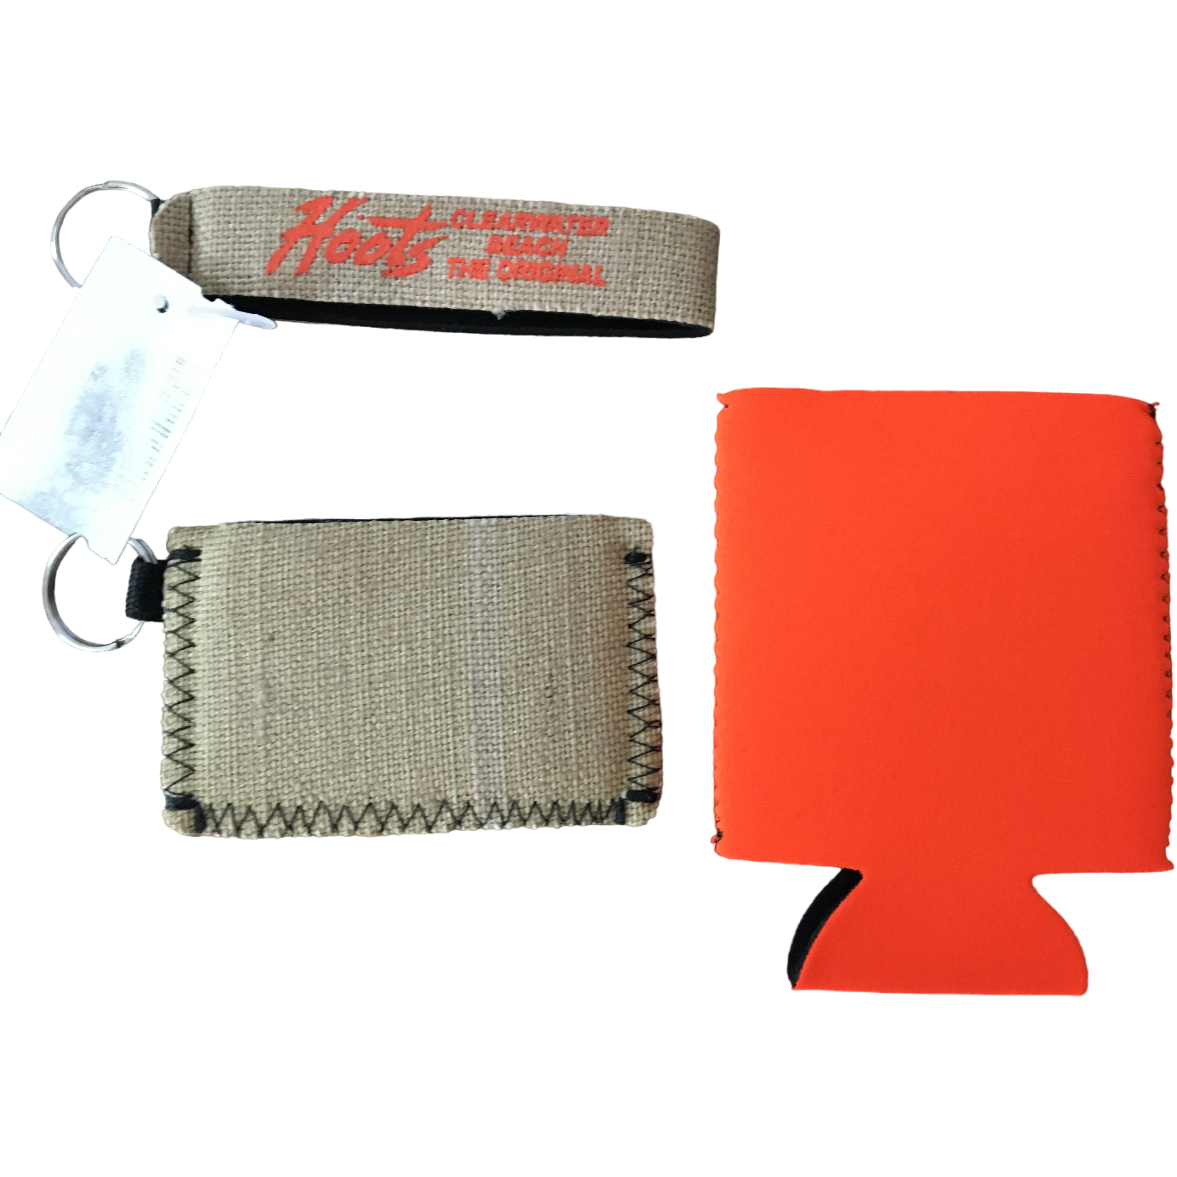 Hoots Clearwater Beach Koozie, Key Ring and Credit Card Holder